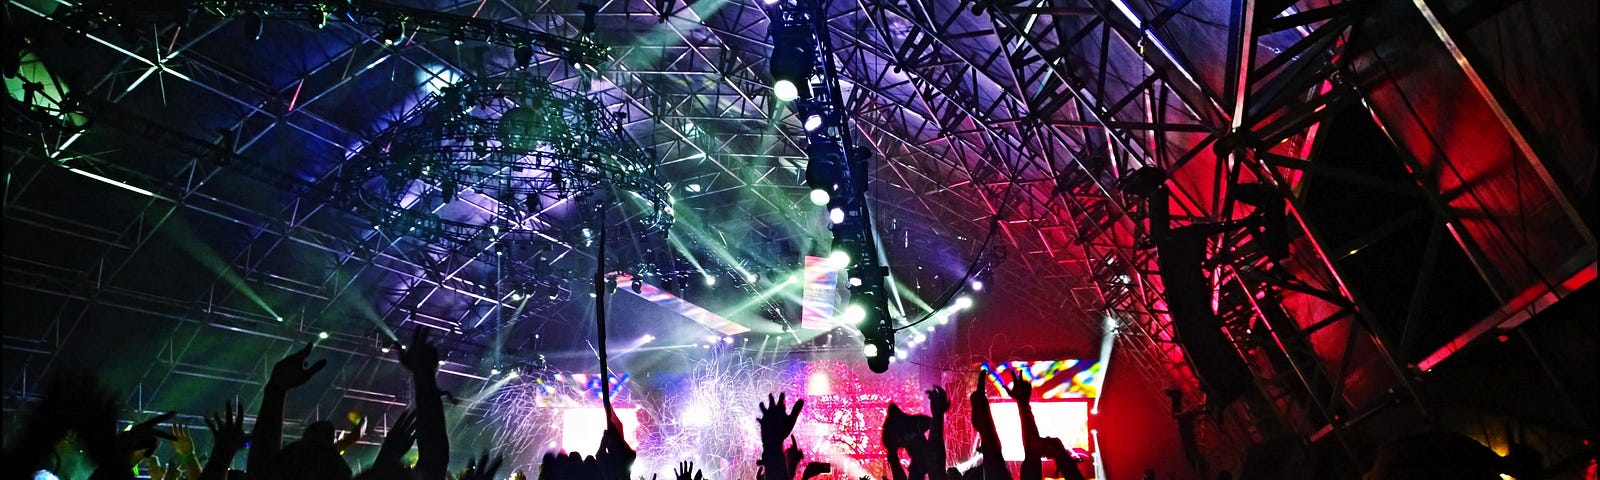 Silhoutted bodies at concert foregrounding colourful light-show on stage and semi-circle roof.